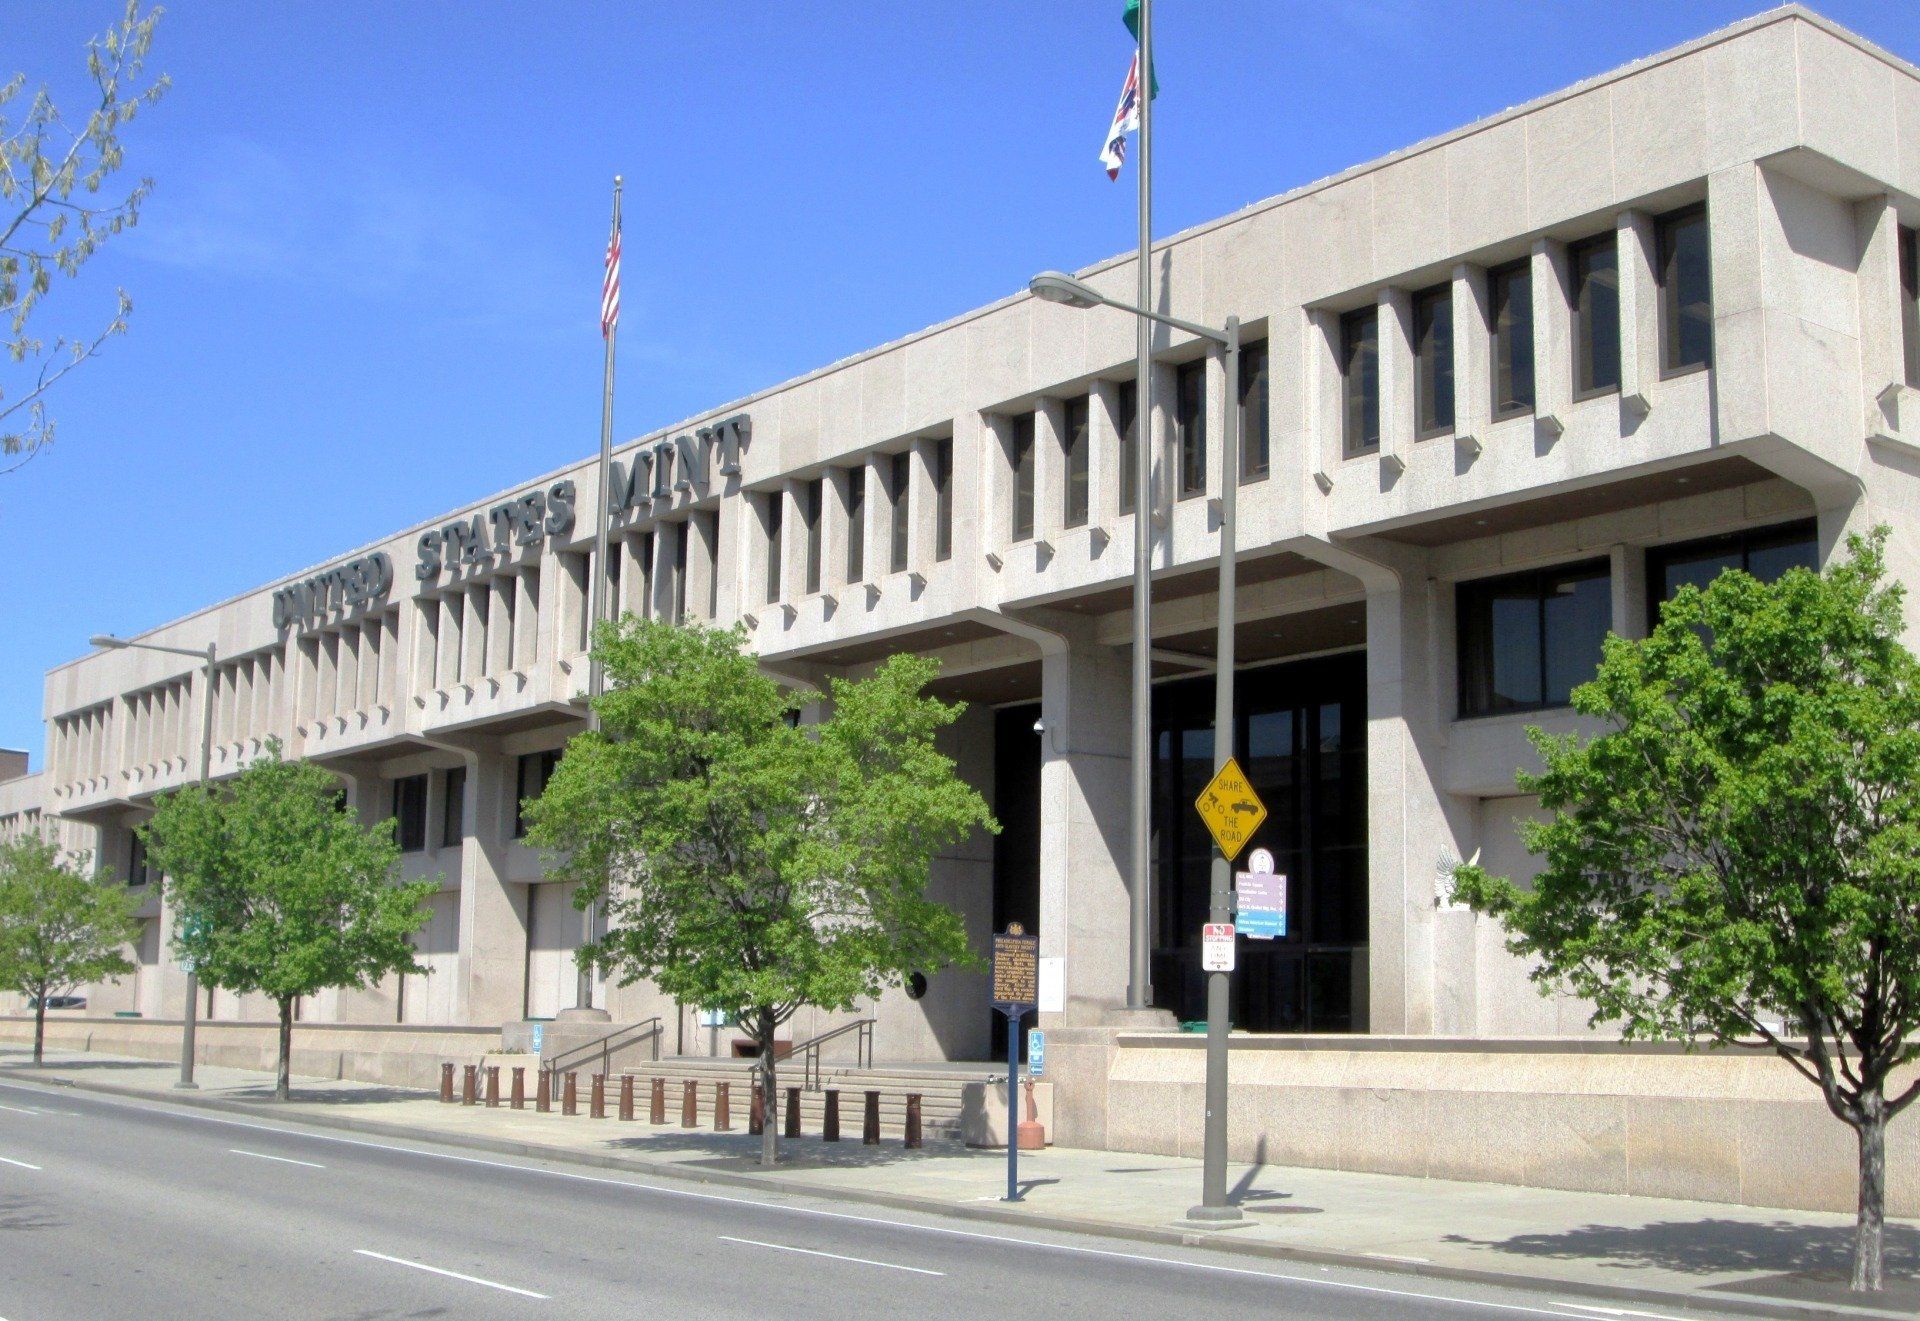 The United States Mint